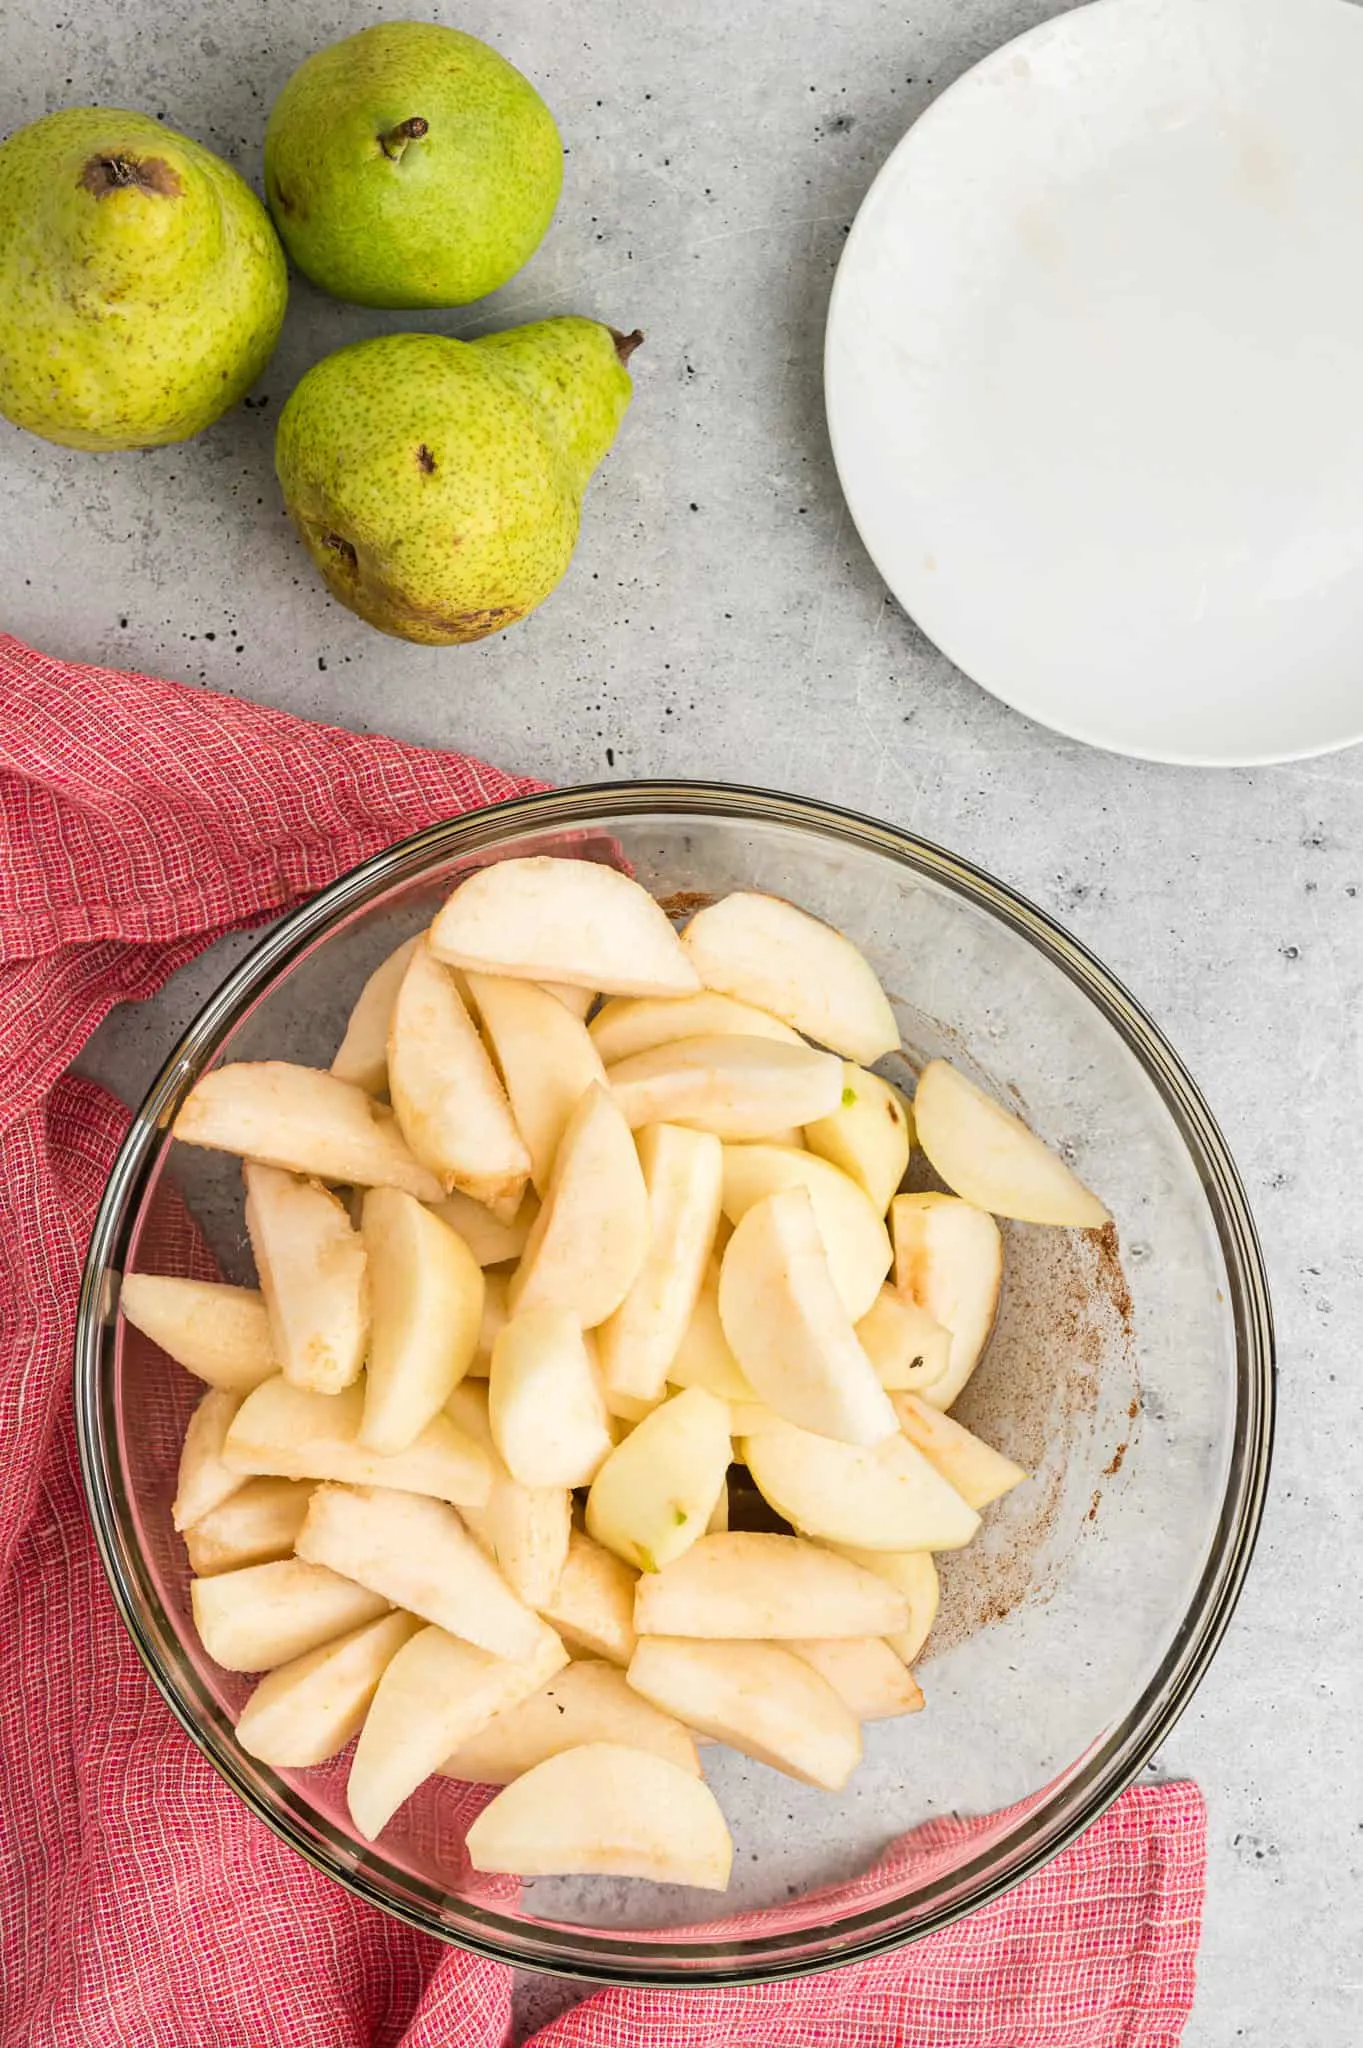 pear slices in a bowl